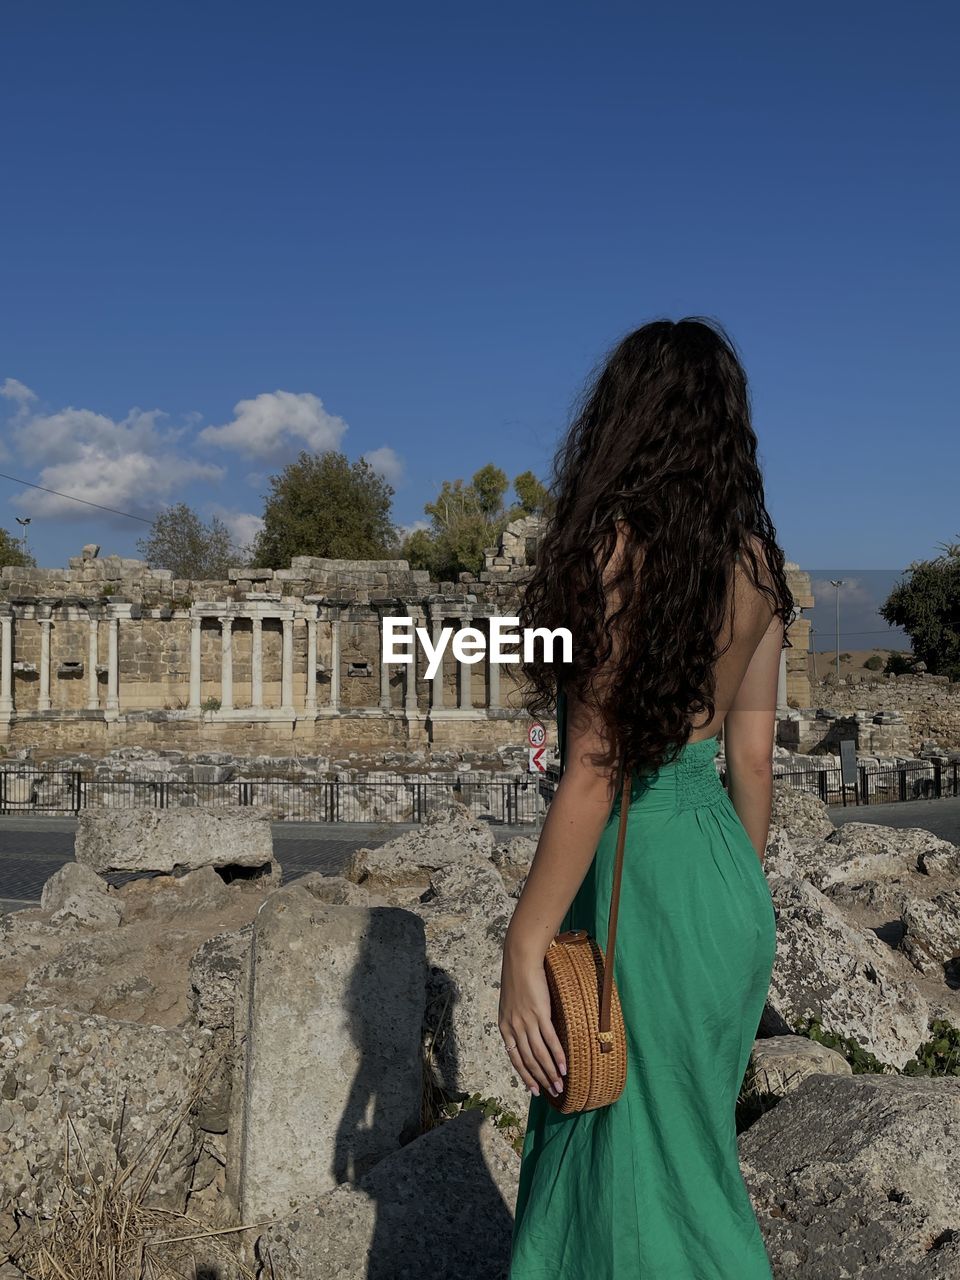 one person, architecture, history, nature, sky, the past, women, vacation, old ruin, ancient, adult, travel destinations, travel, hairstyle, built structure, rear view, long hair, temple, blue, leisure activity, tourism, day, young adult, ancient history, dress, standing, ruins, land, archaeology, brown hair, rock, waist up, person, sunlight, sunny, outdoors, clothing, lifestyles, clear sky, fashion, tourist, ancient civilization, building exterior, three quarter length, trip, casual clothing